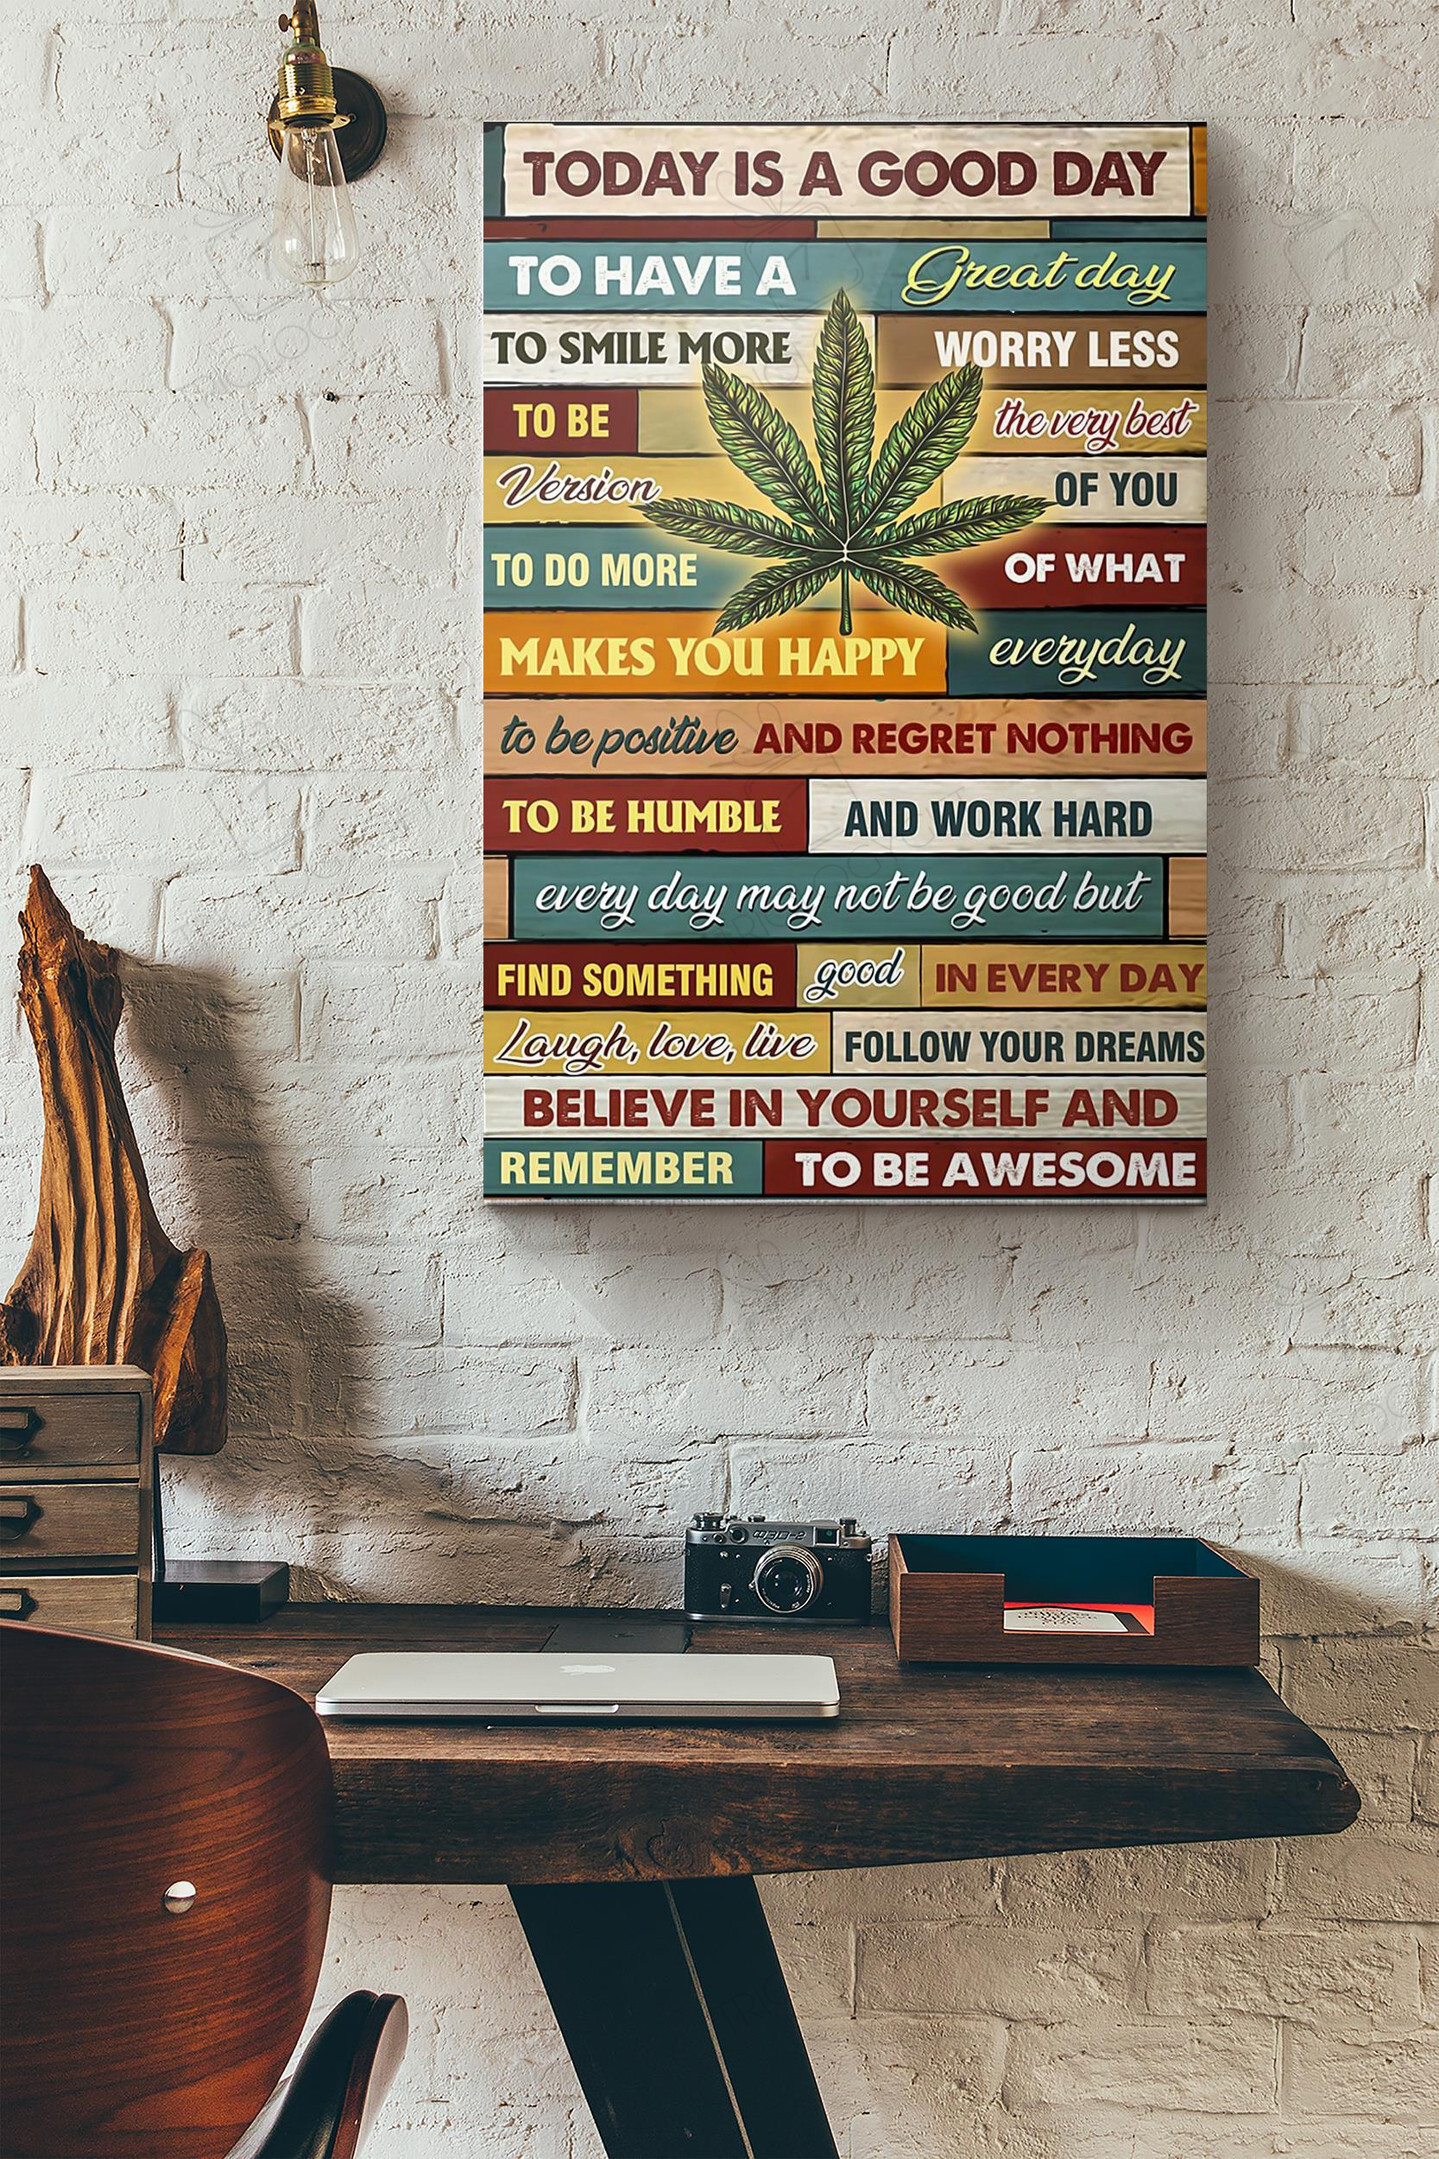 Weed Today Is A Good Day Canvas Painting Ideas, Canvas Hanging Prints, Gift Idea Framed Prints, Canvas Paintings Wrapped Canvas 8x10